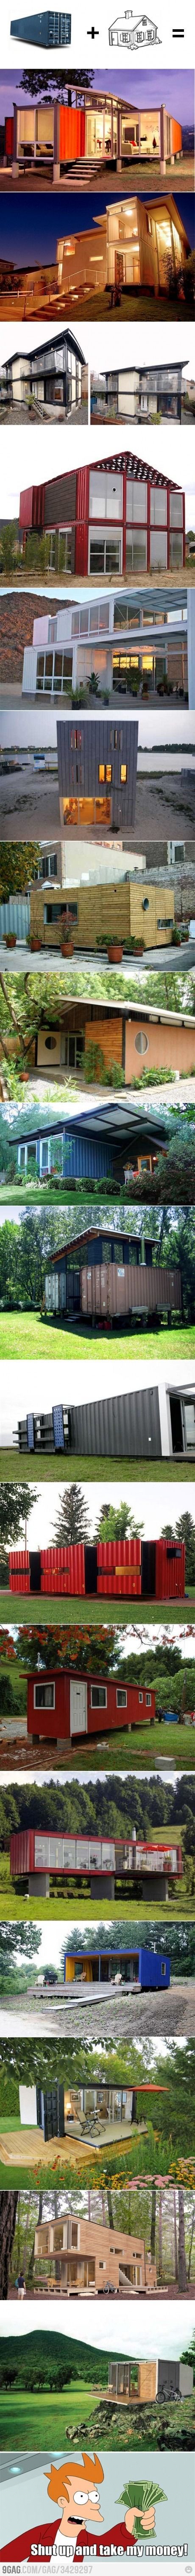 Container Homes: so cool!